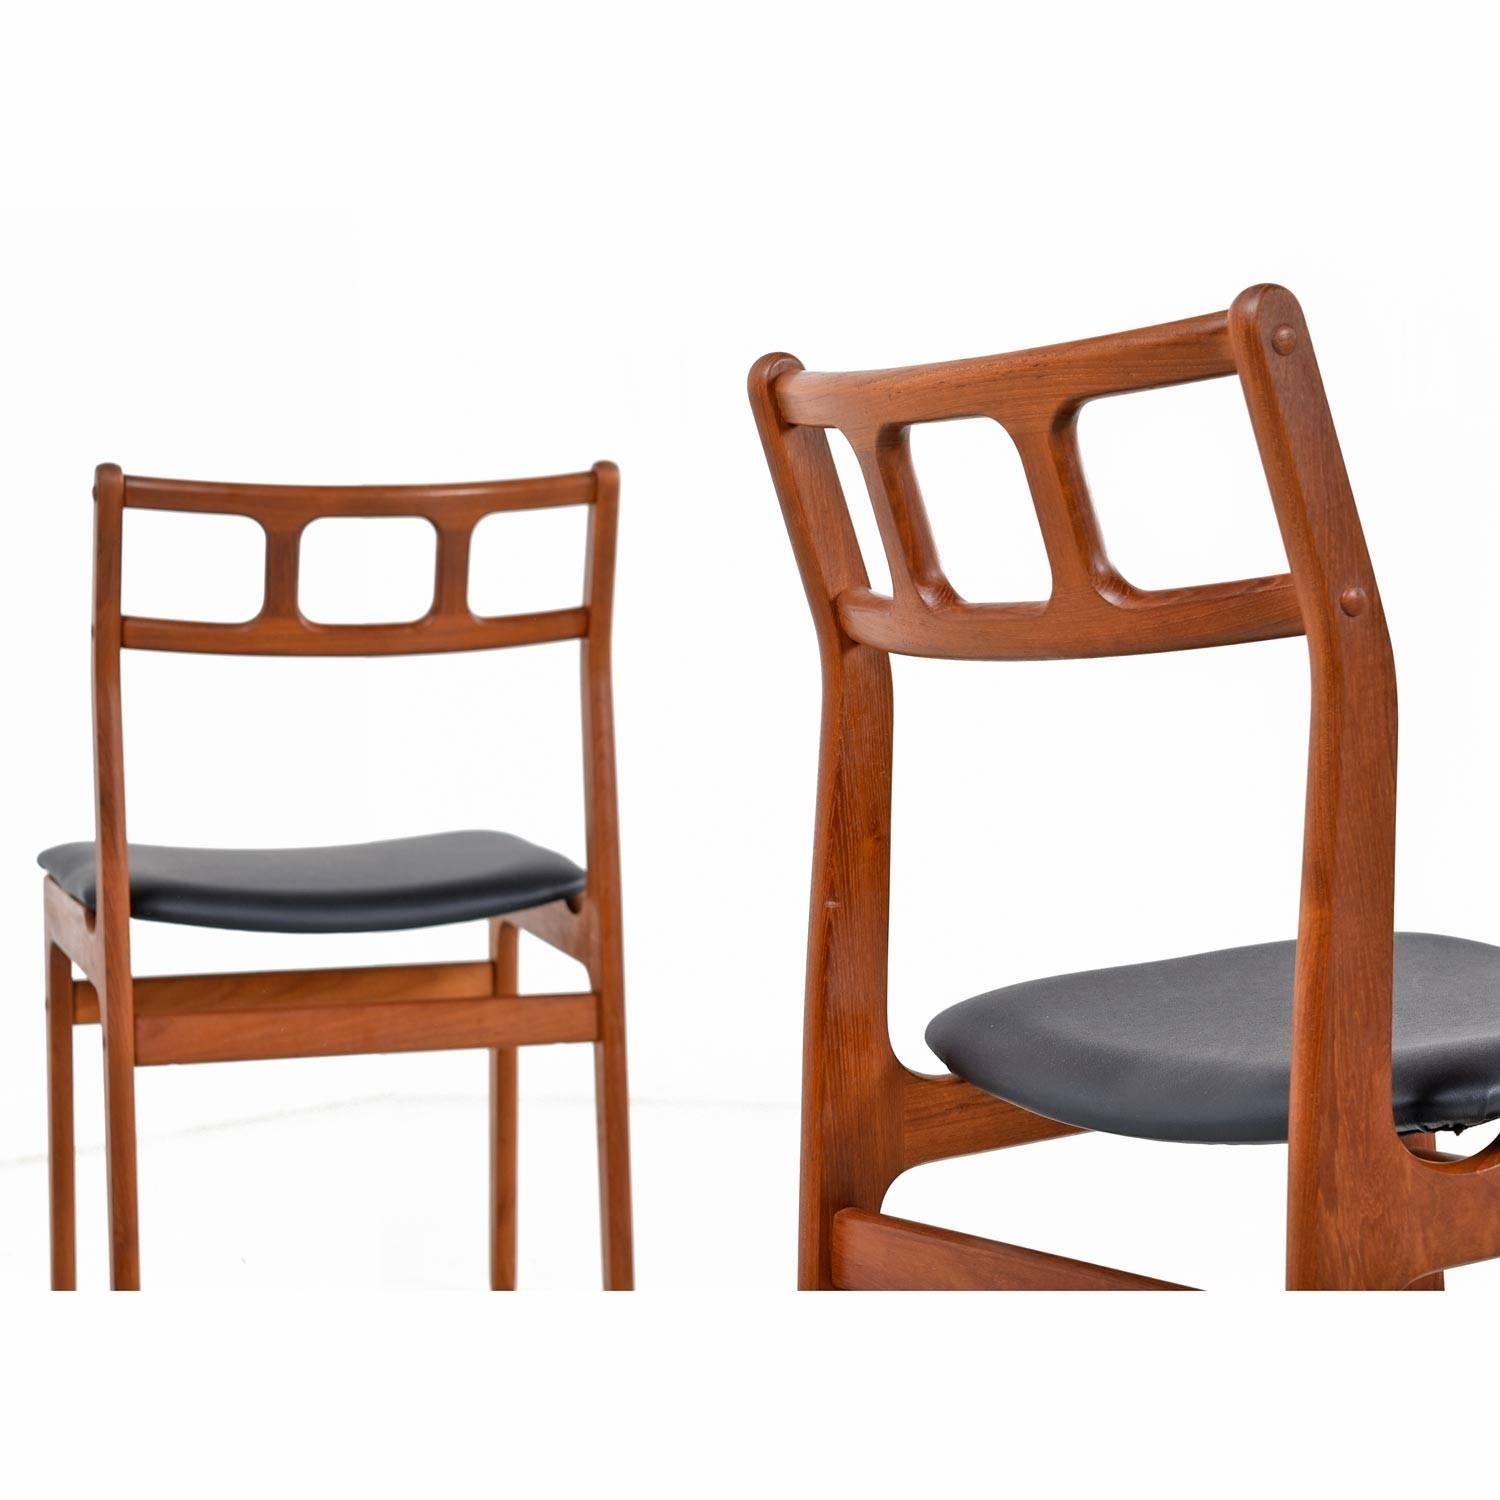 Set of four solid teak vintage Danish modern dining chairs. The quintessential Scandinavian design features a Minimalist approach with two contoured lateral spanners to support the back. The seats have been updated with new high quality vinyl